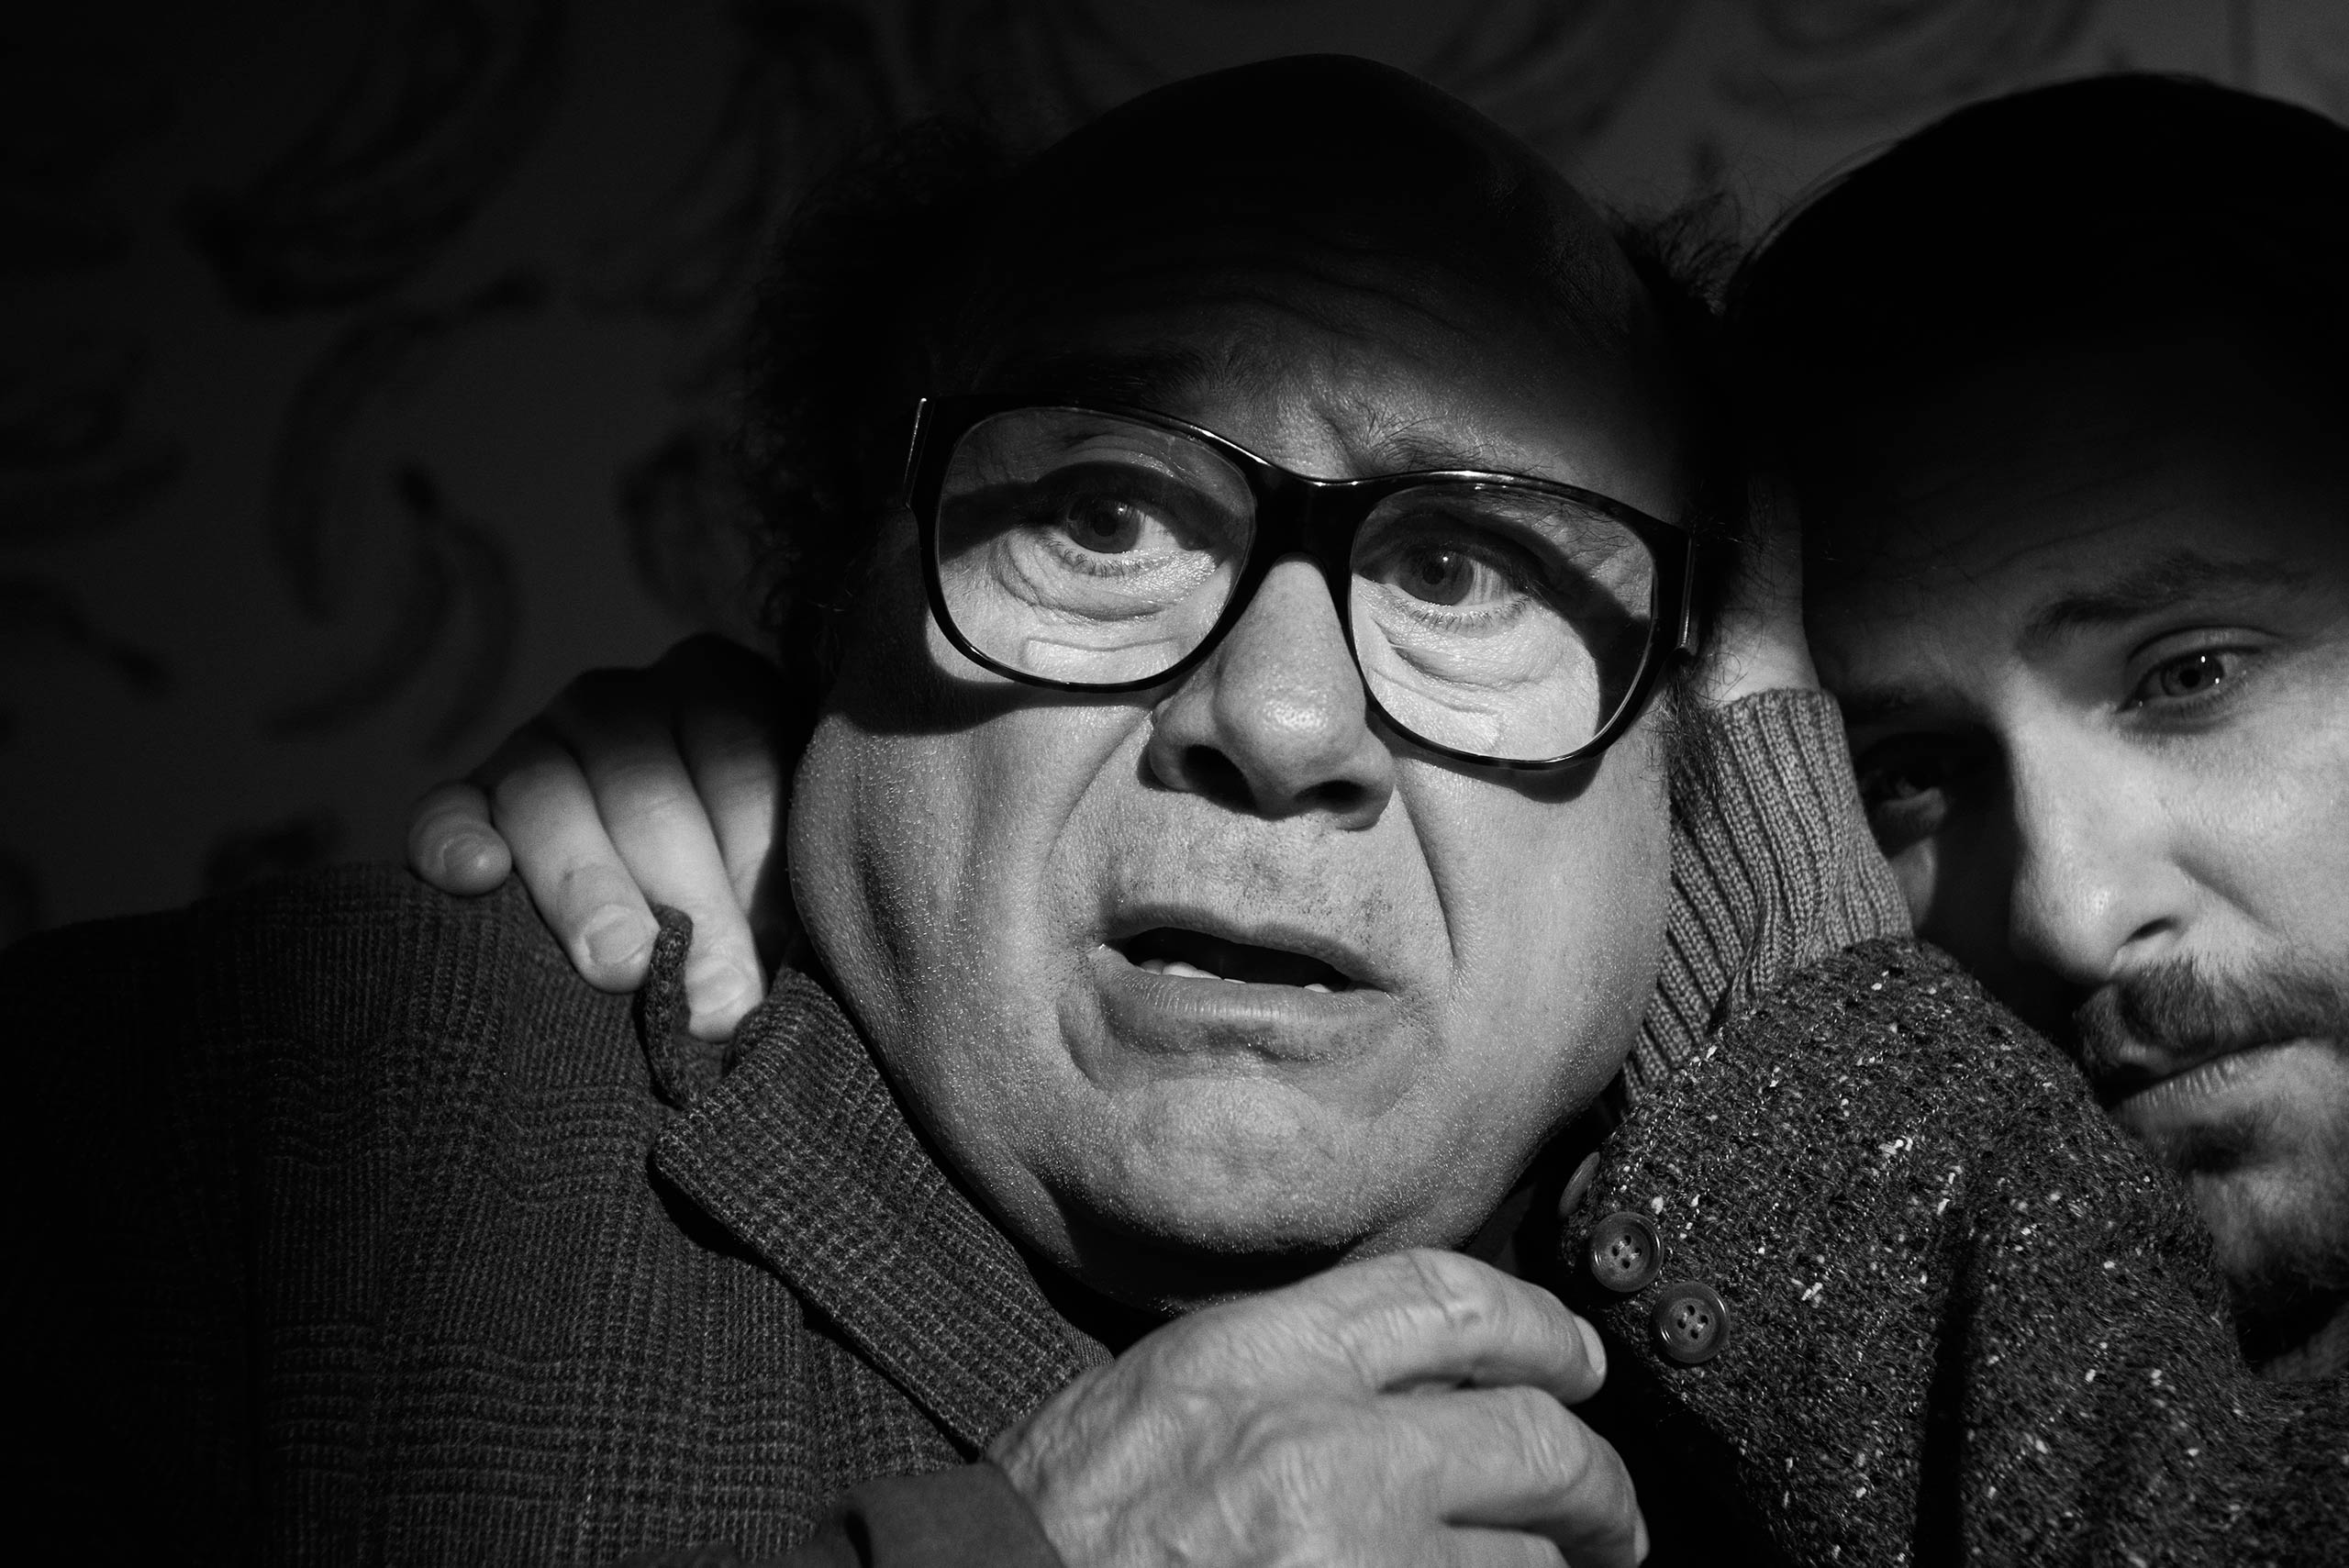 These days, DeVito is best known for his role as the impossibly depraved Frank on FXX's 'It's Always Sunny in Philadelphia.'